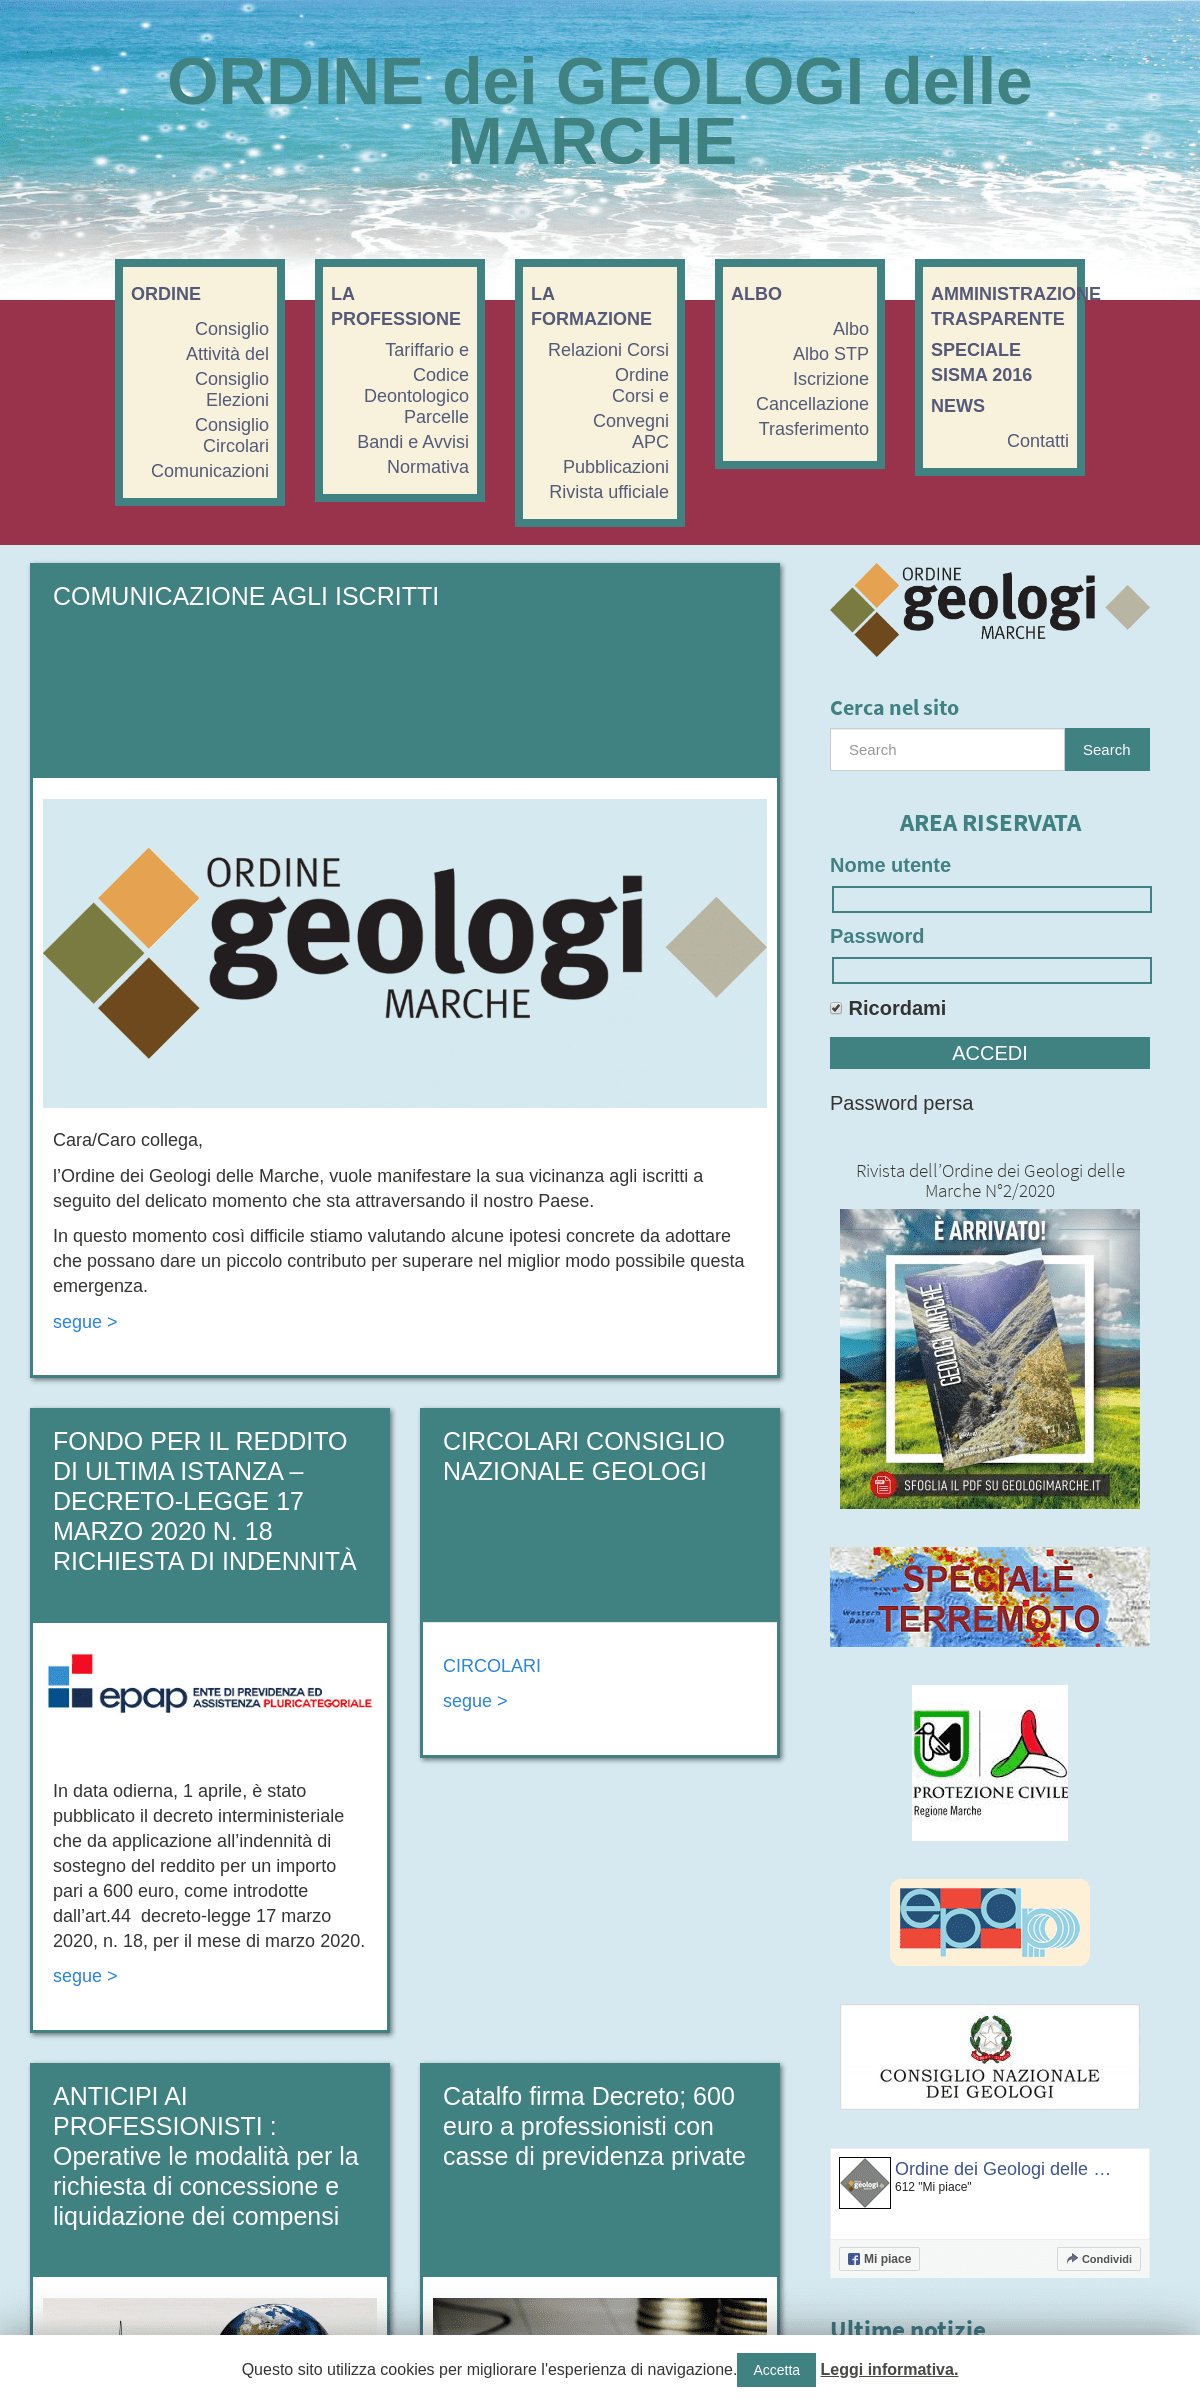 A complete backup of geologimarche.it